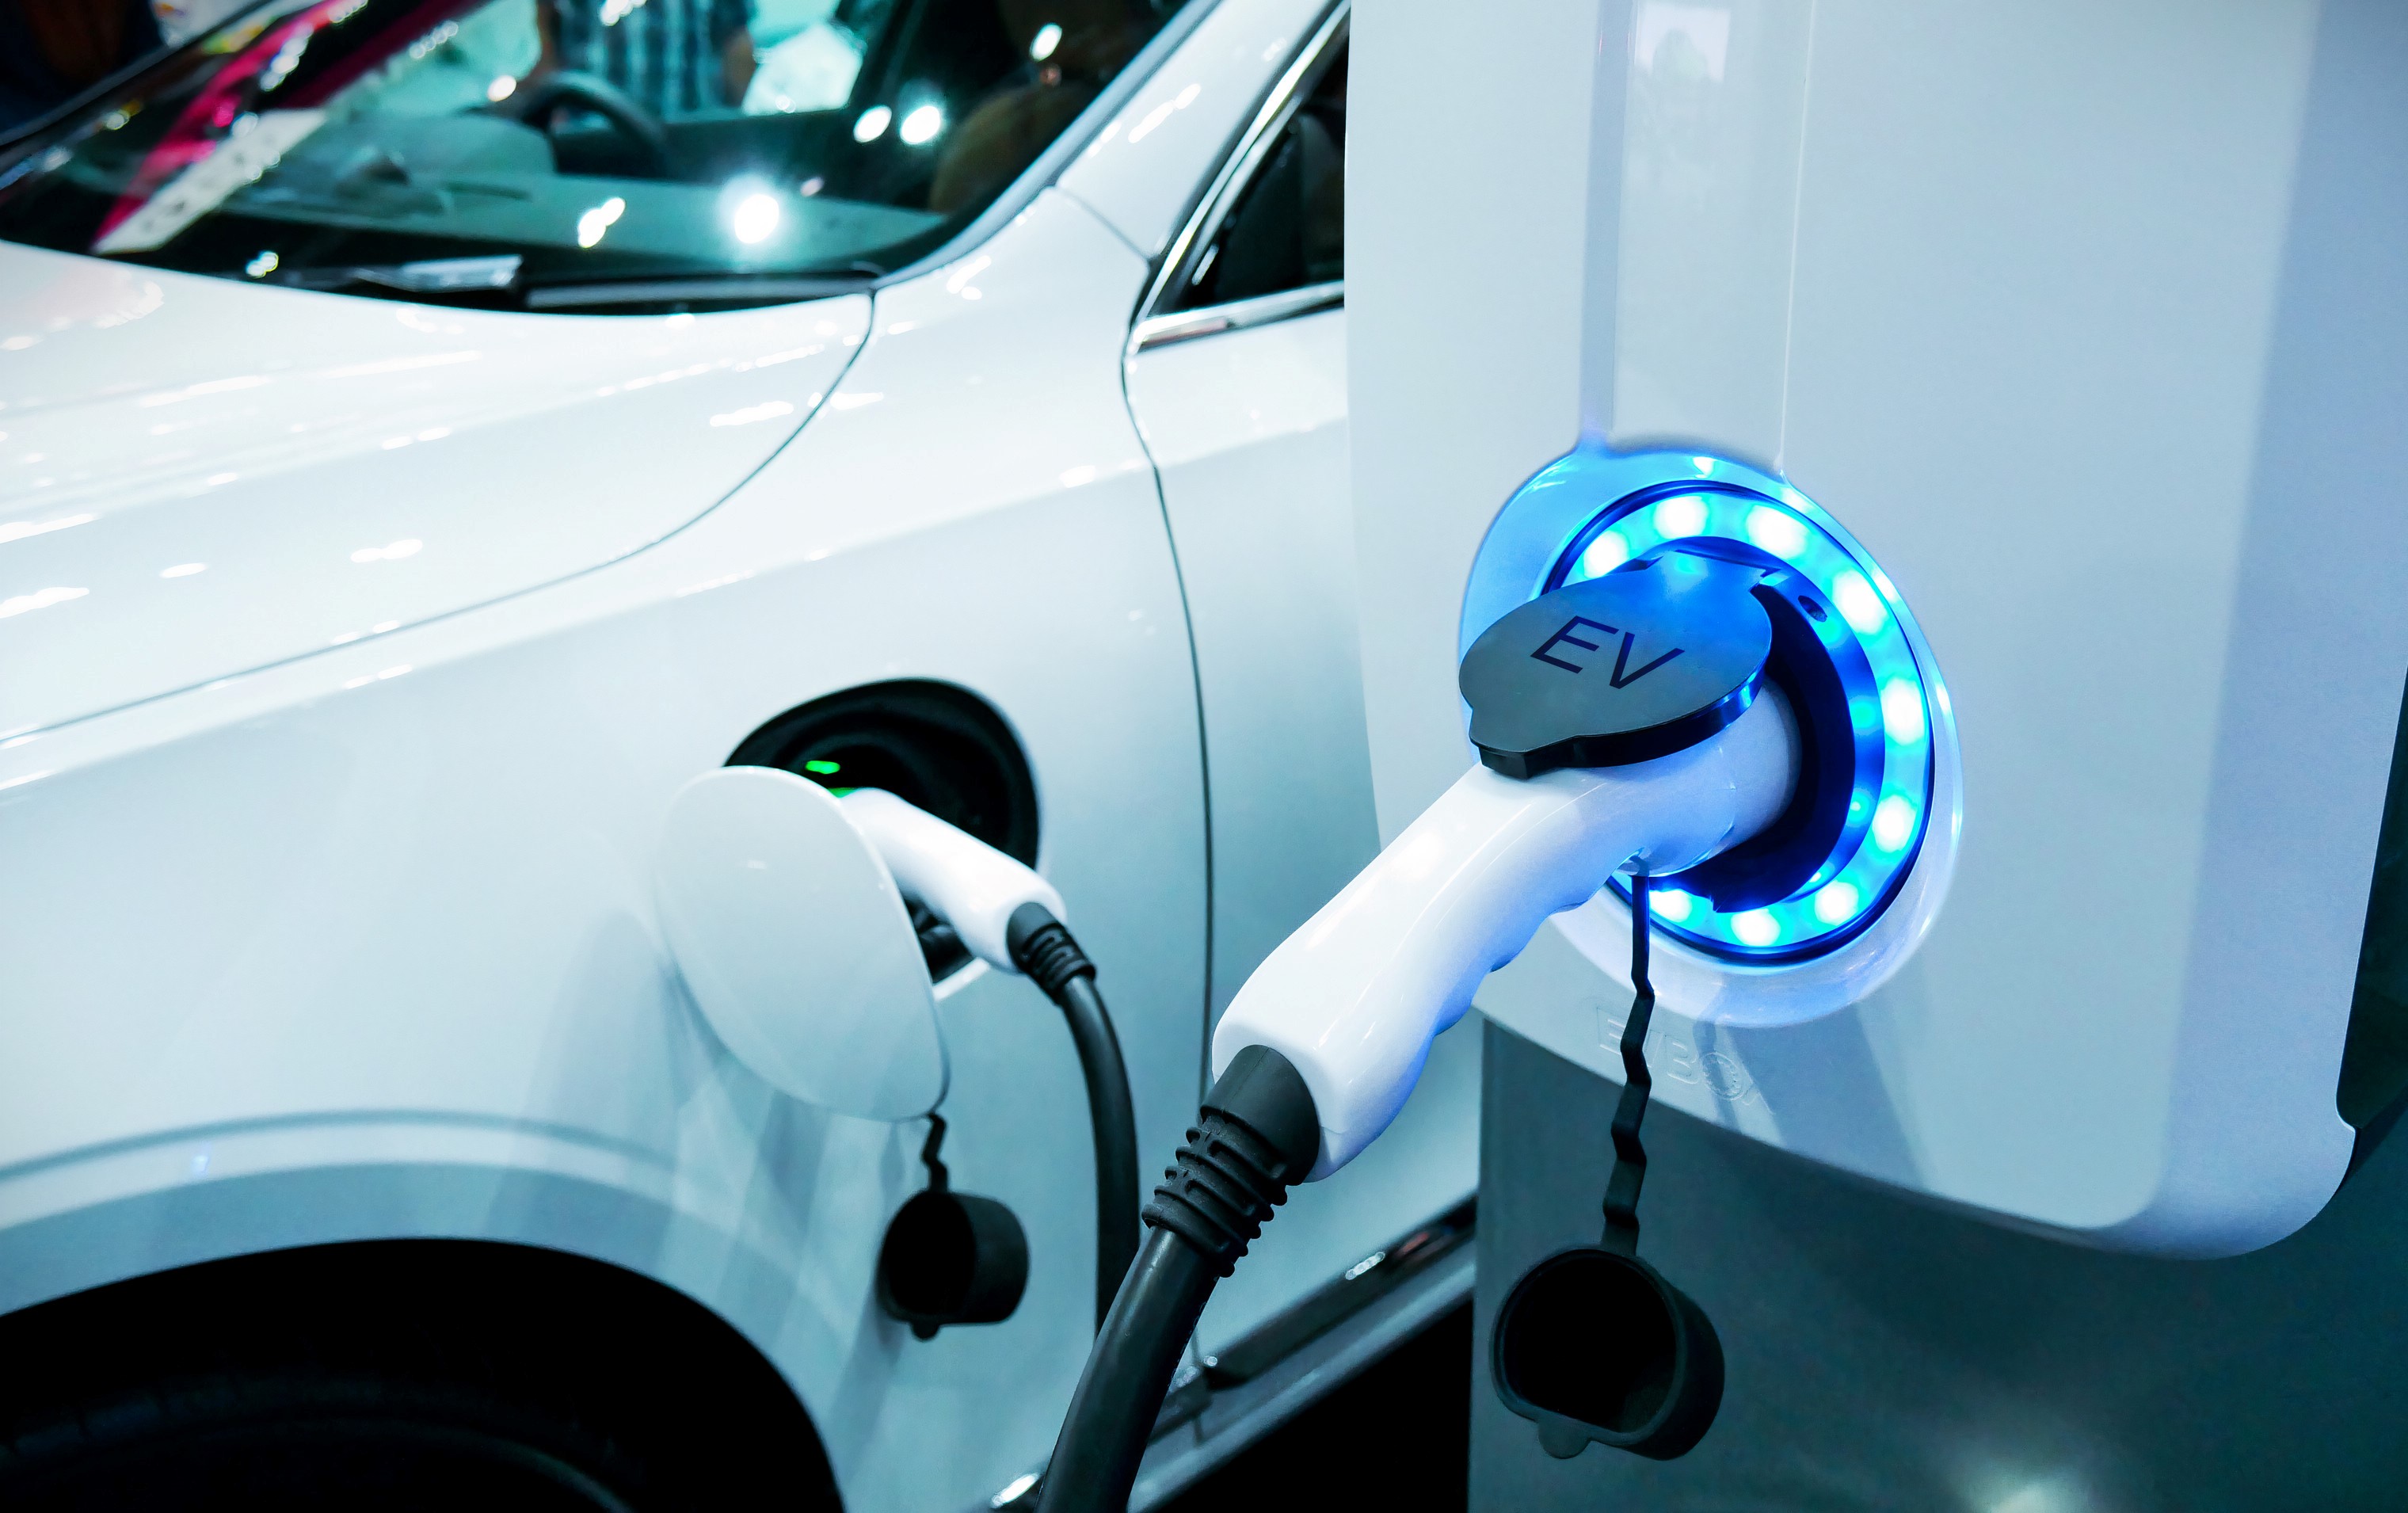 Winning projects of UK’s £20m electric vehicle innovation competition